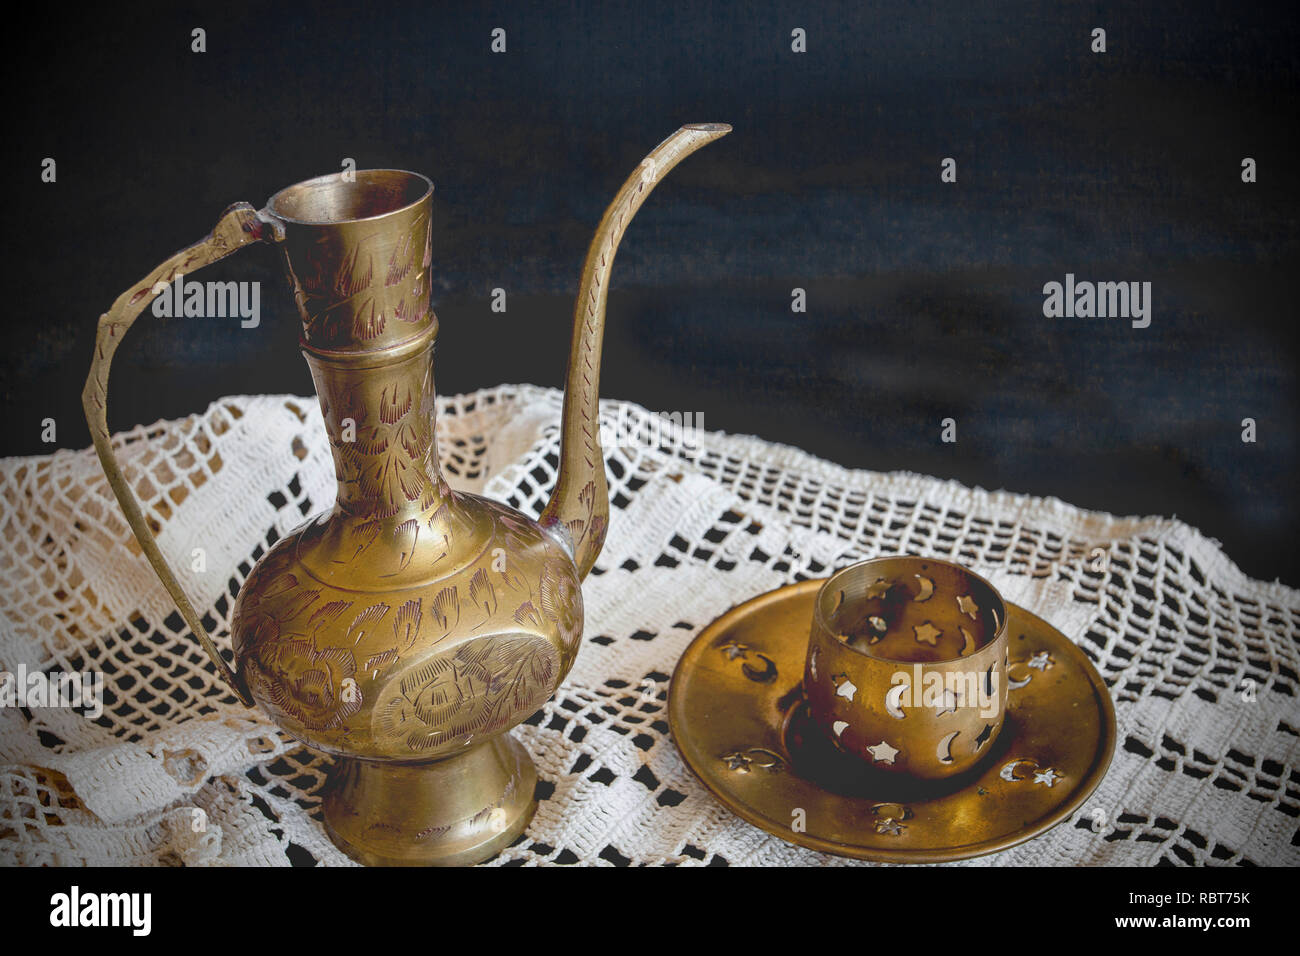 A copper pot for liquids and a copper candleholder on hand-knit lace. Handmade. Ancient items. Stock Photo